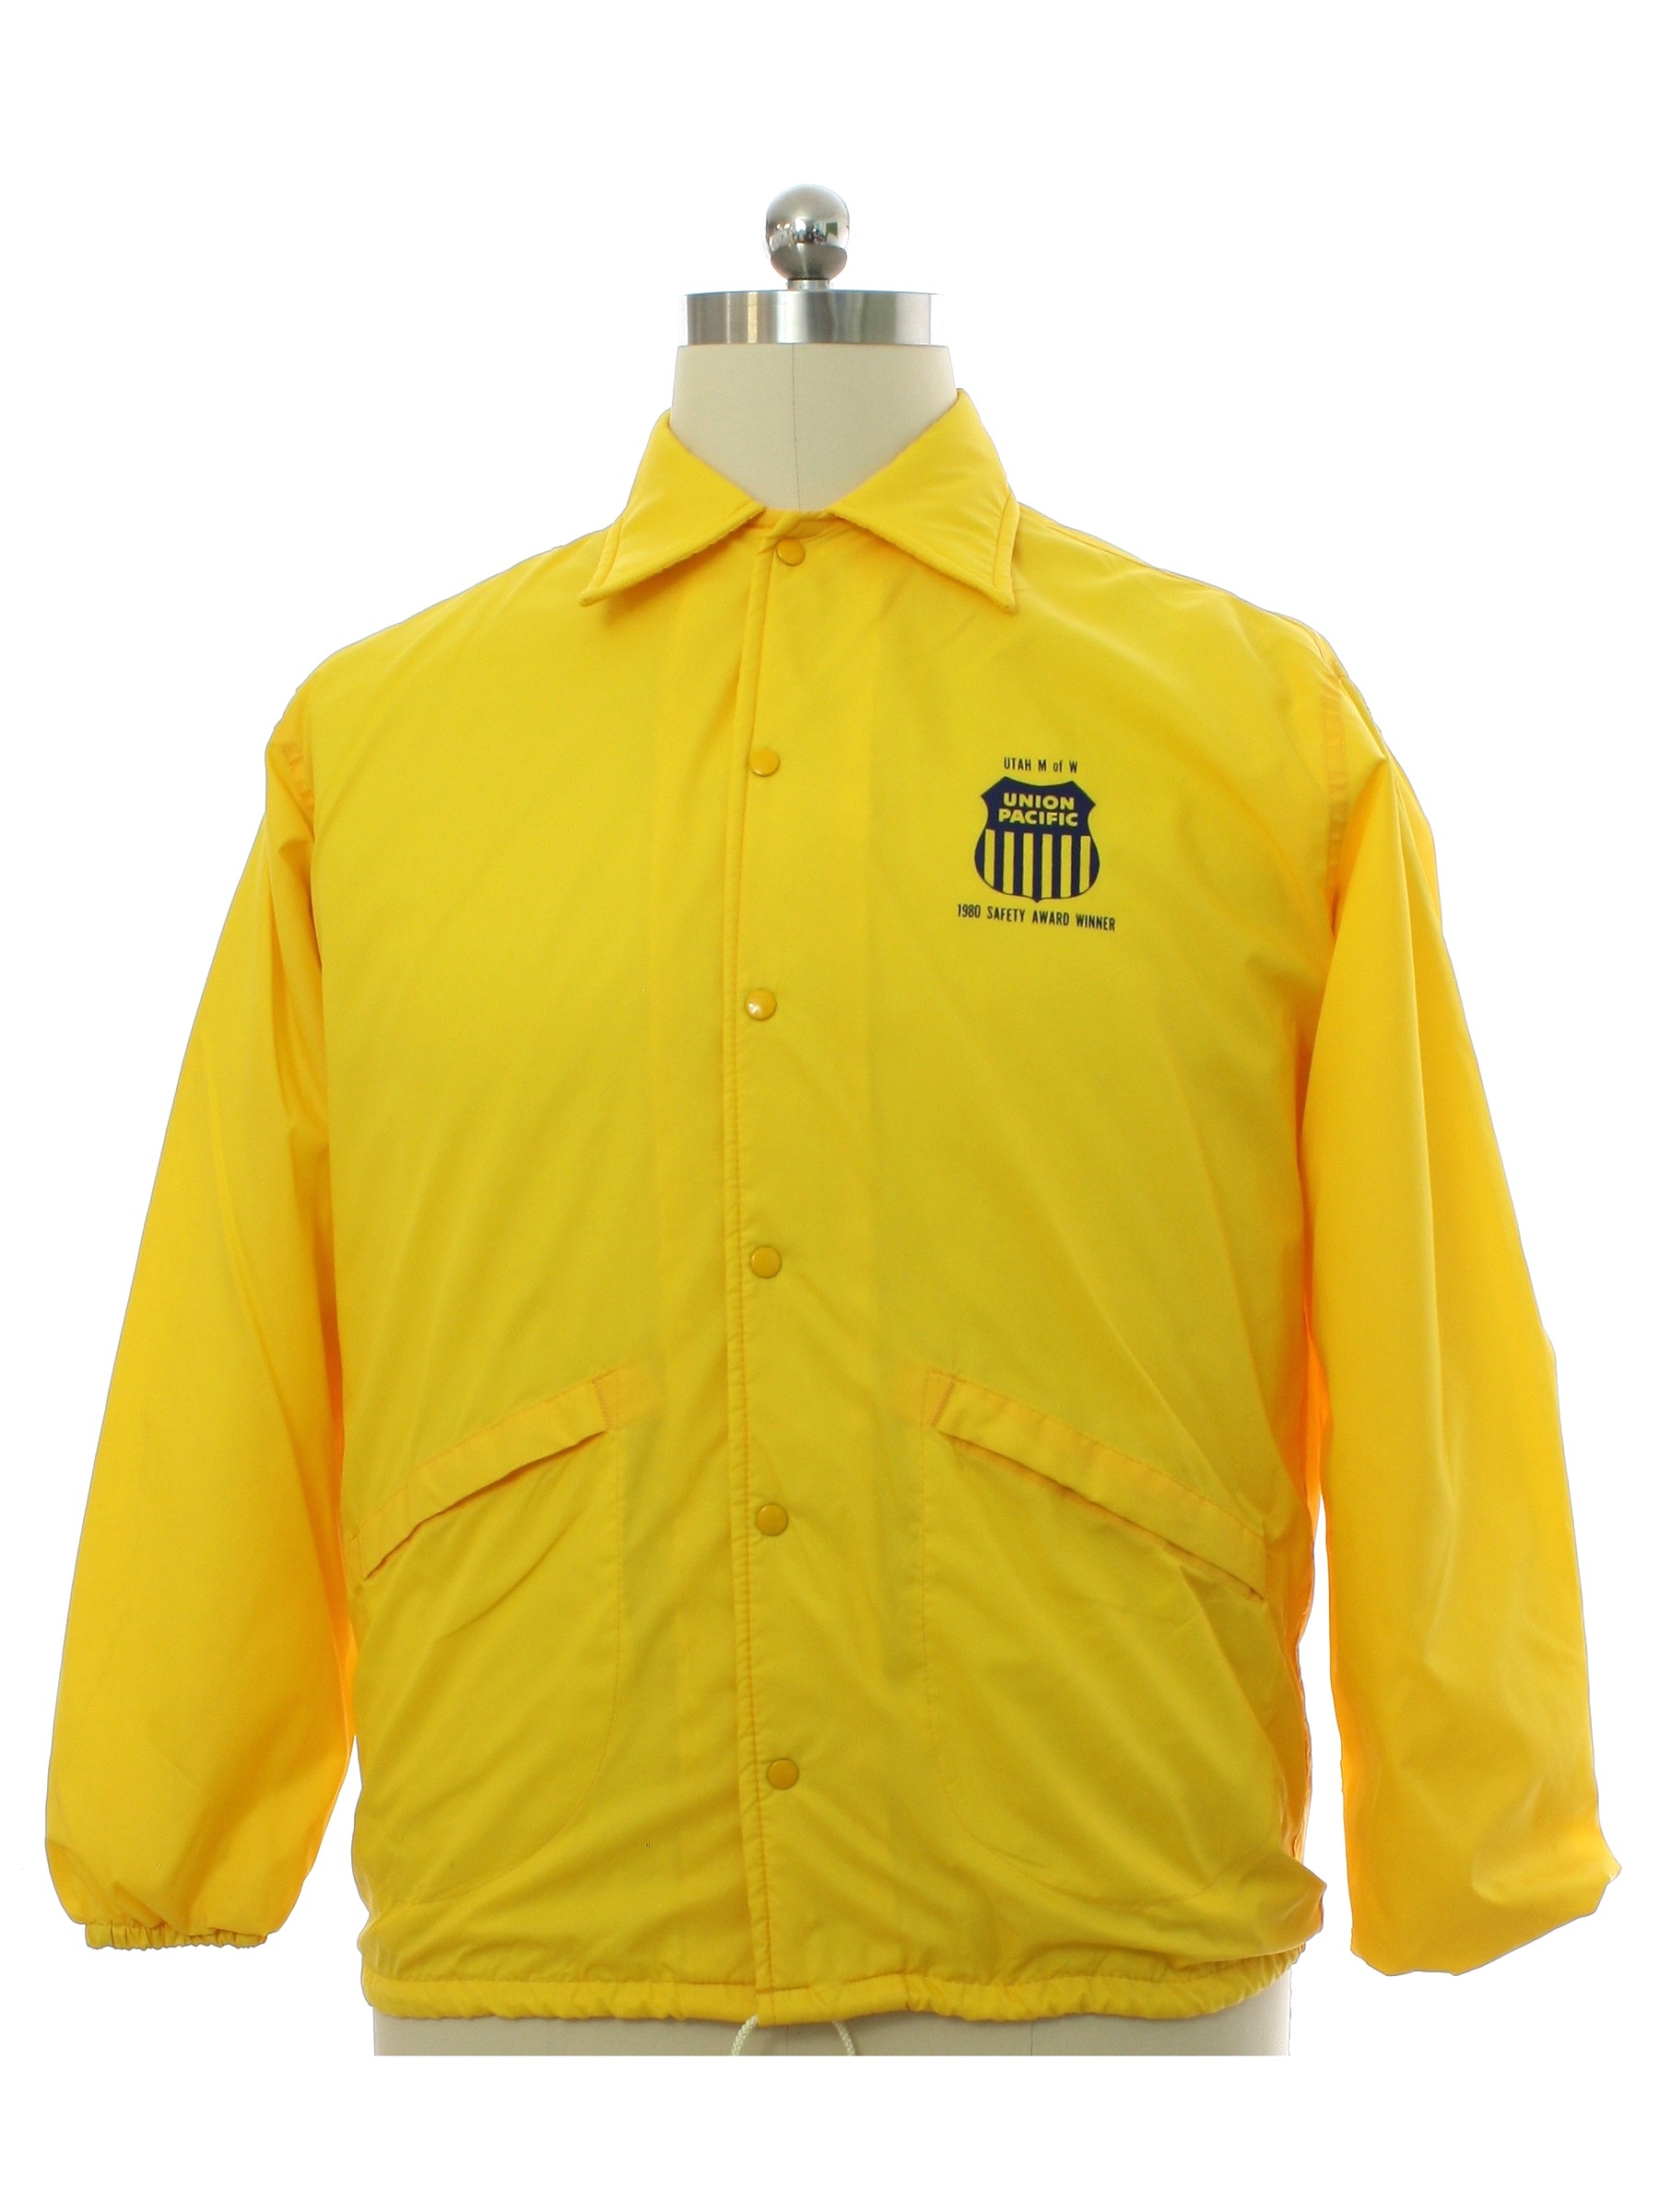 1980s Vintage Jacket: Early 80s -Pla-Jac- Mens tall fit bright yellow ...